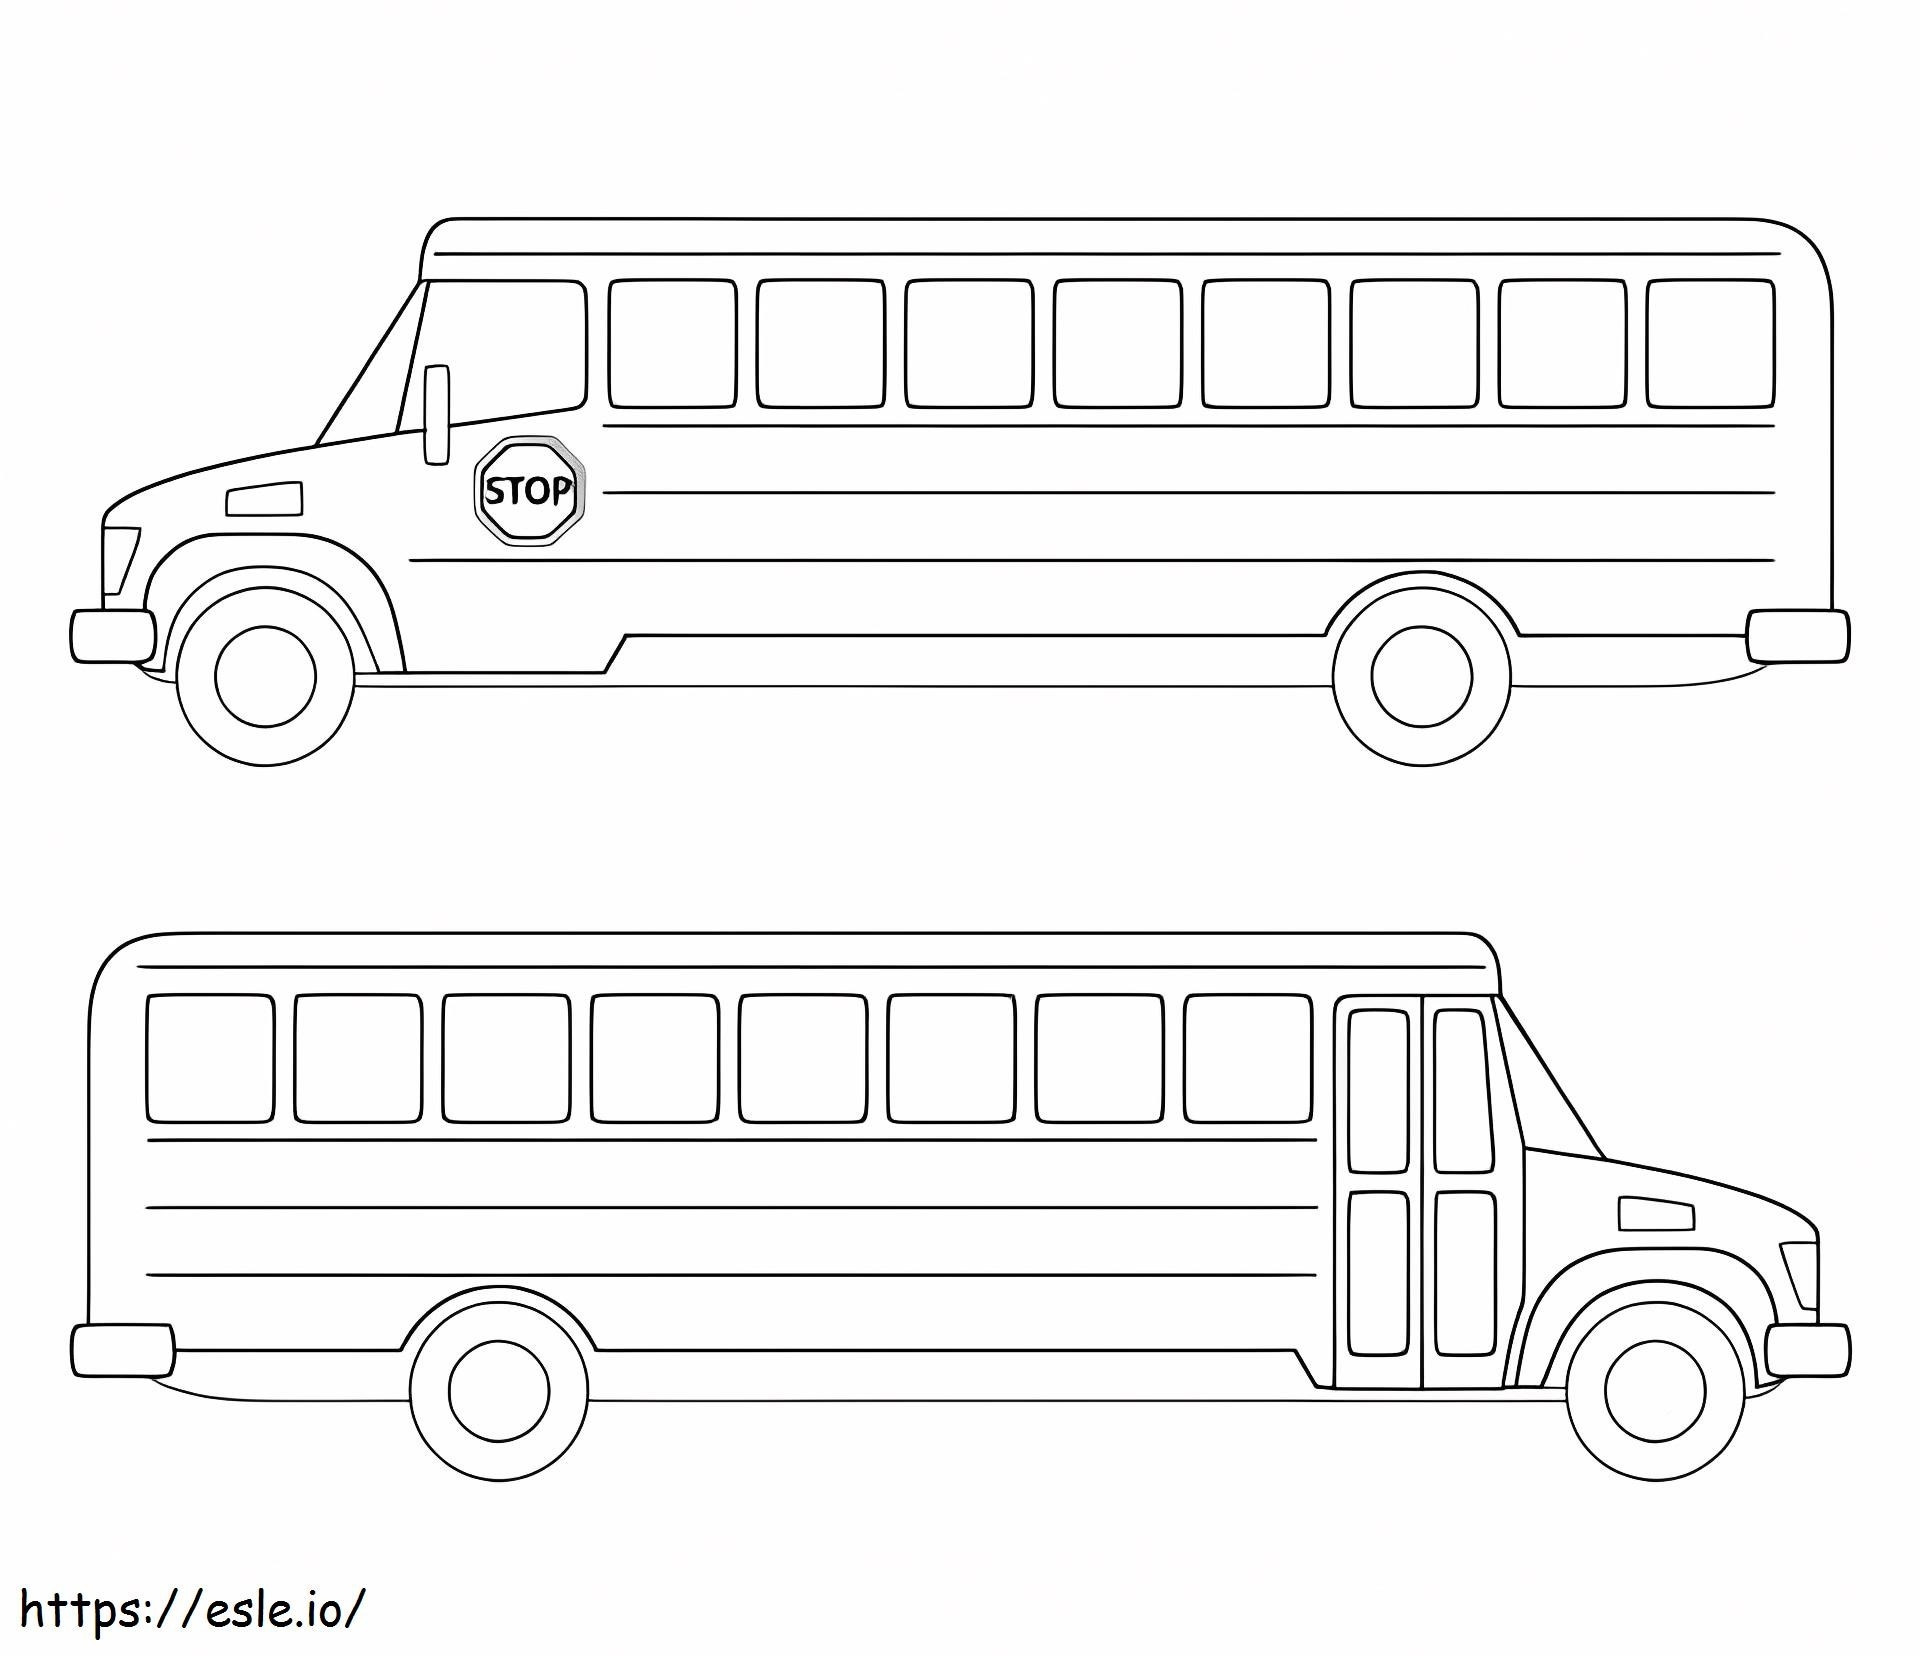 Two School Buses coloring page